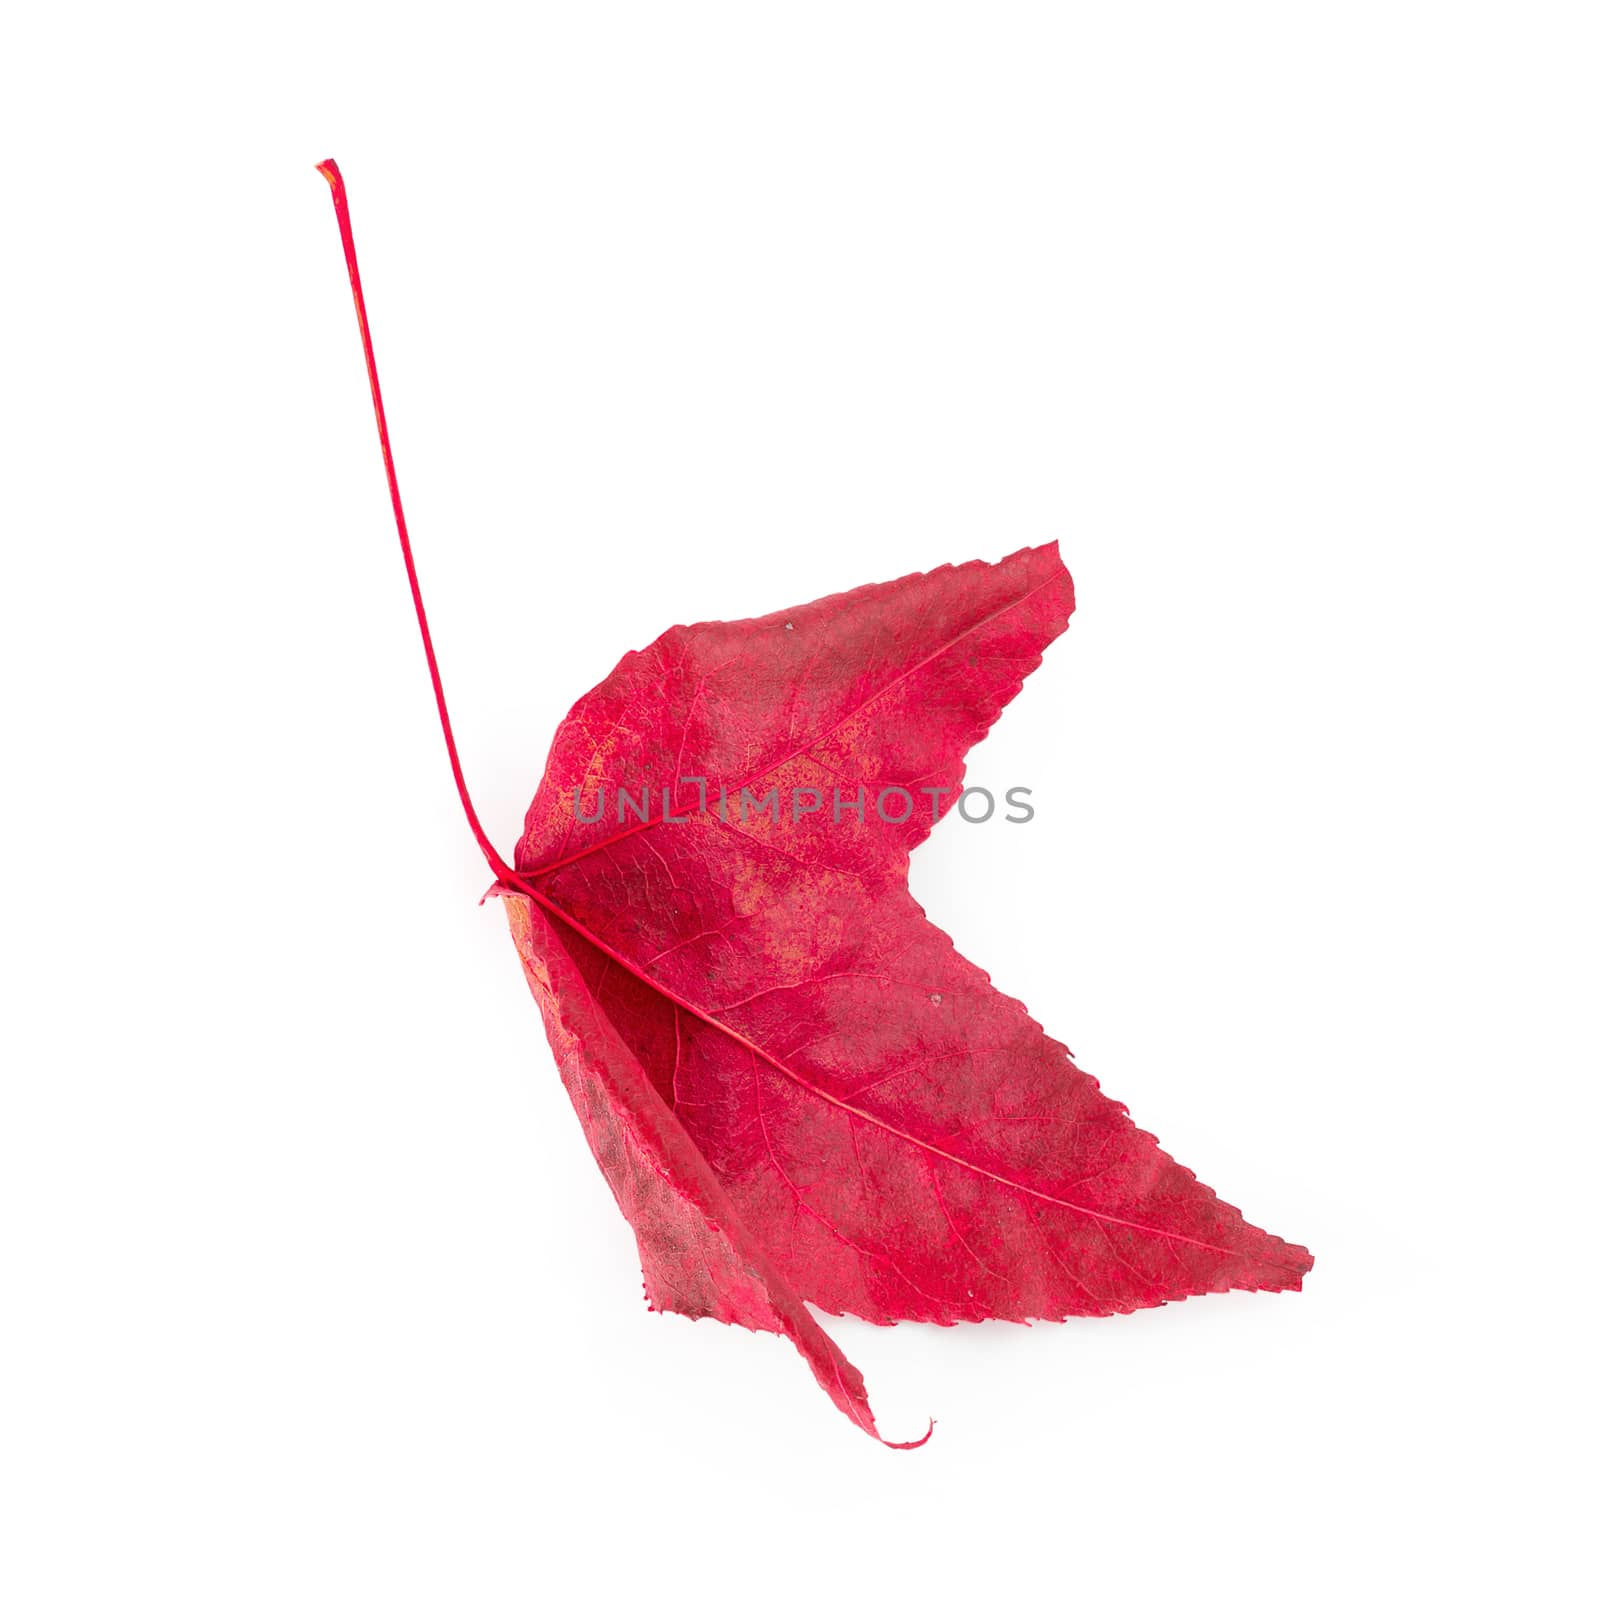 Dried maple leaves isolated on white background.